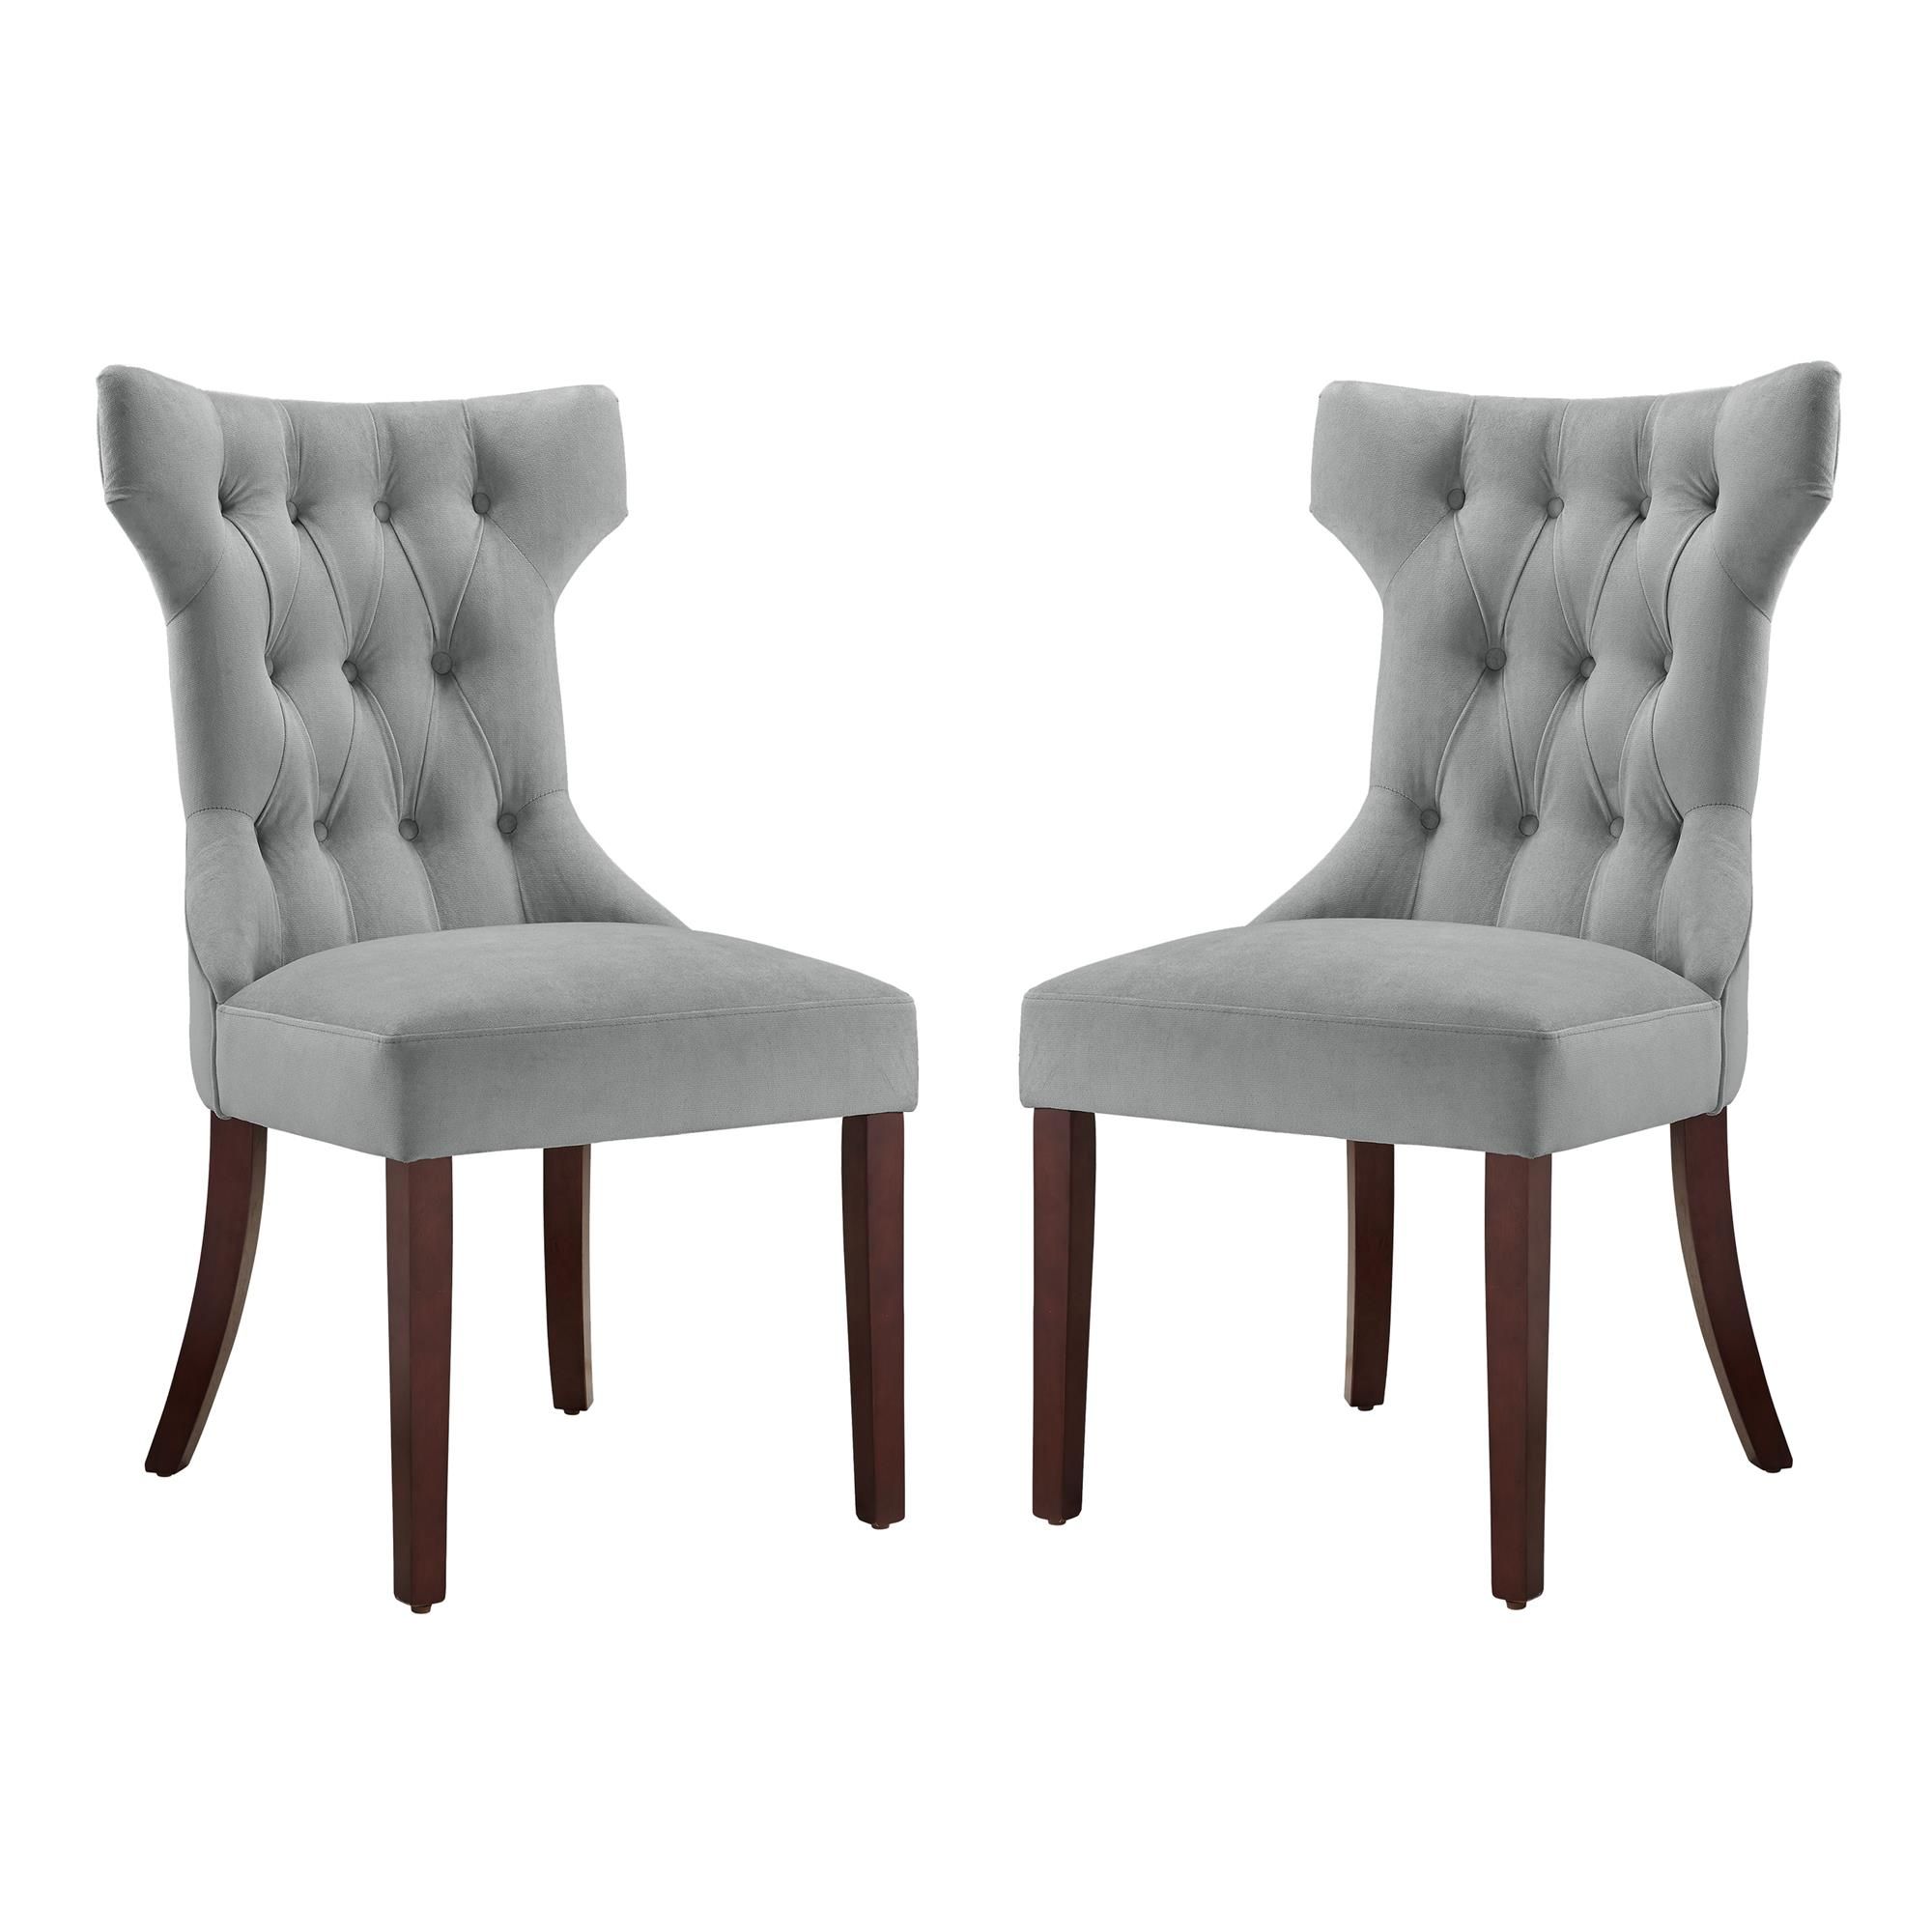 Da6090-pl Clairborne Tufted Dining Chair, Gray